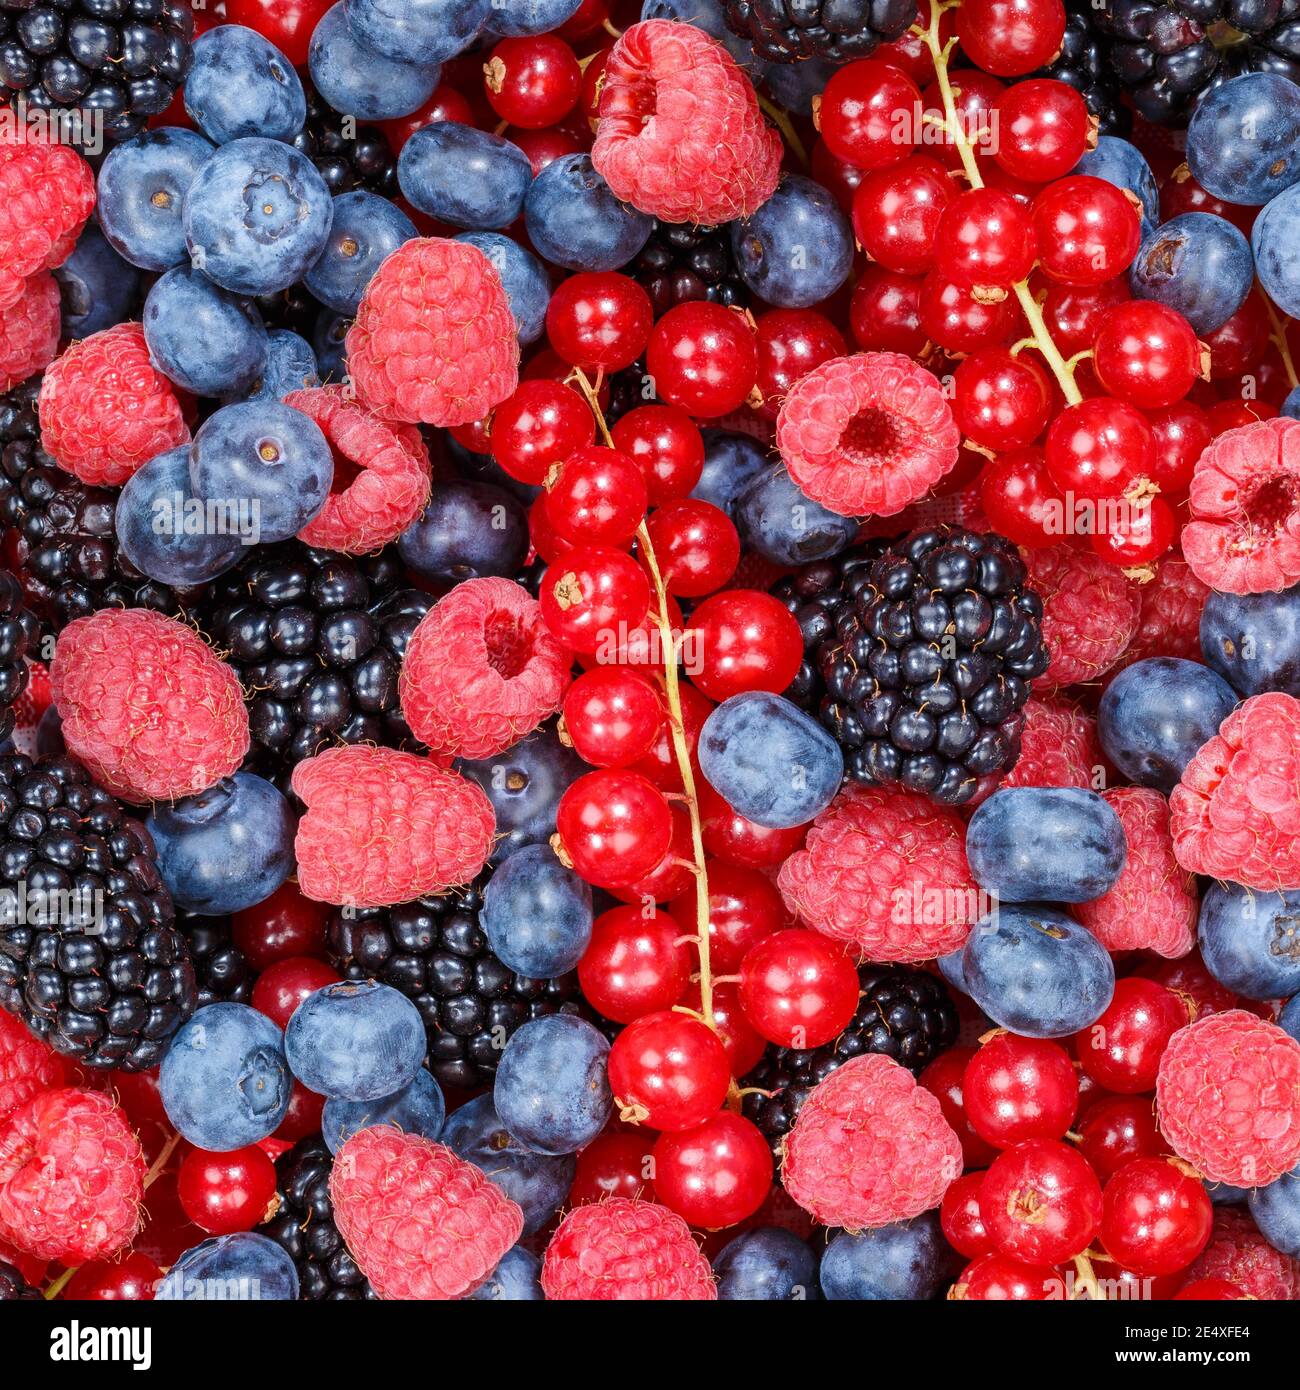 Berries berry fruits collection food background fruit square fresh backgrounds Stock Photo